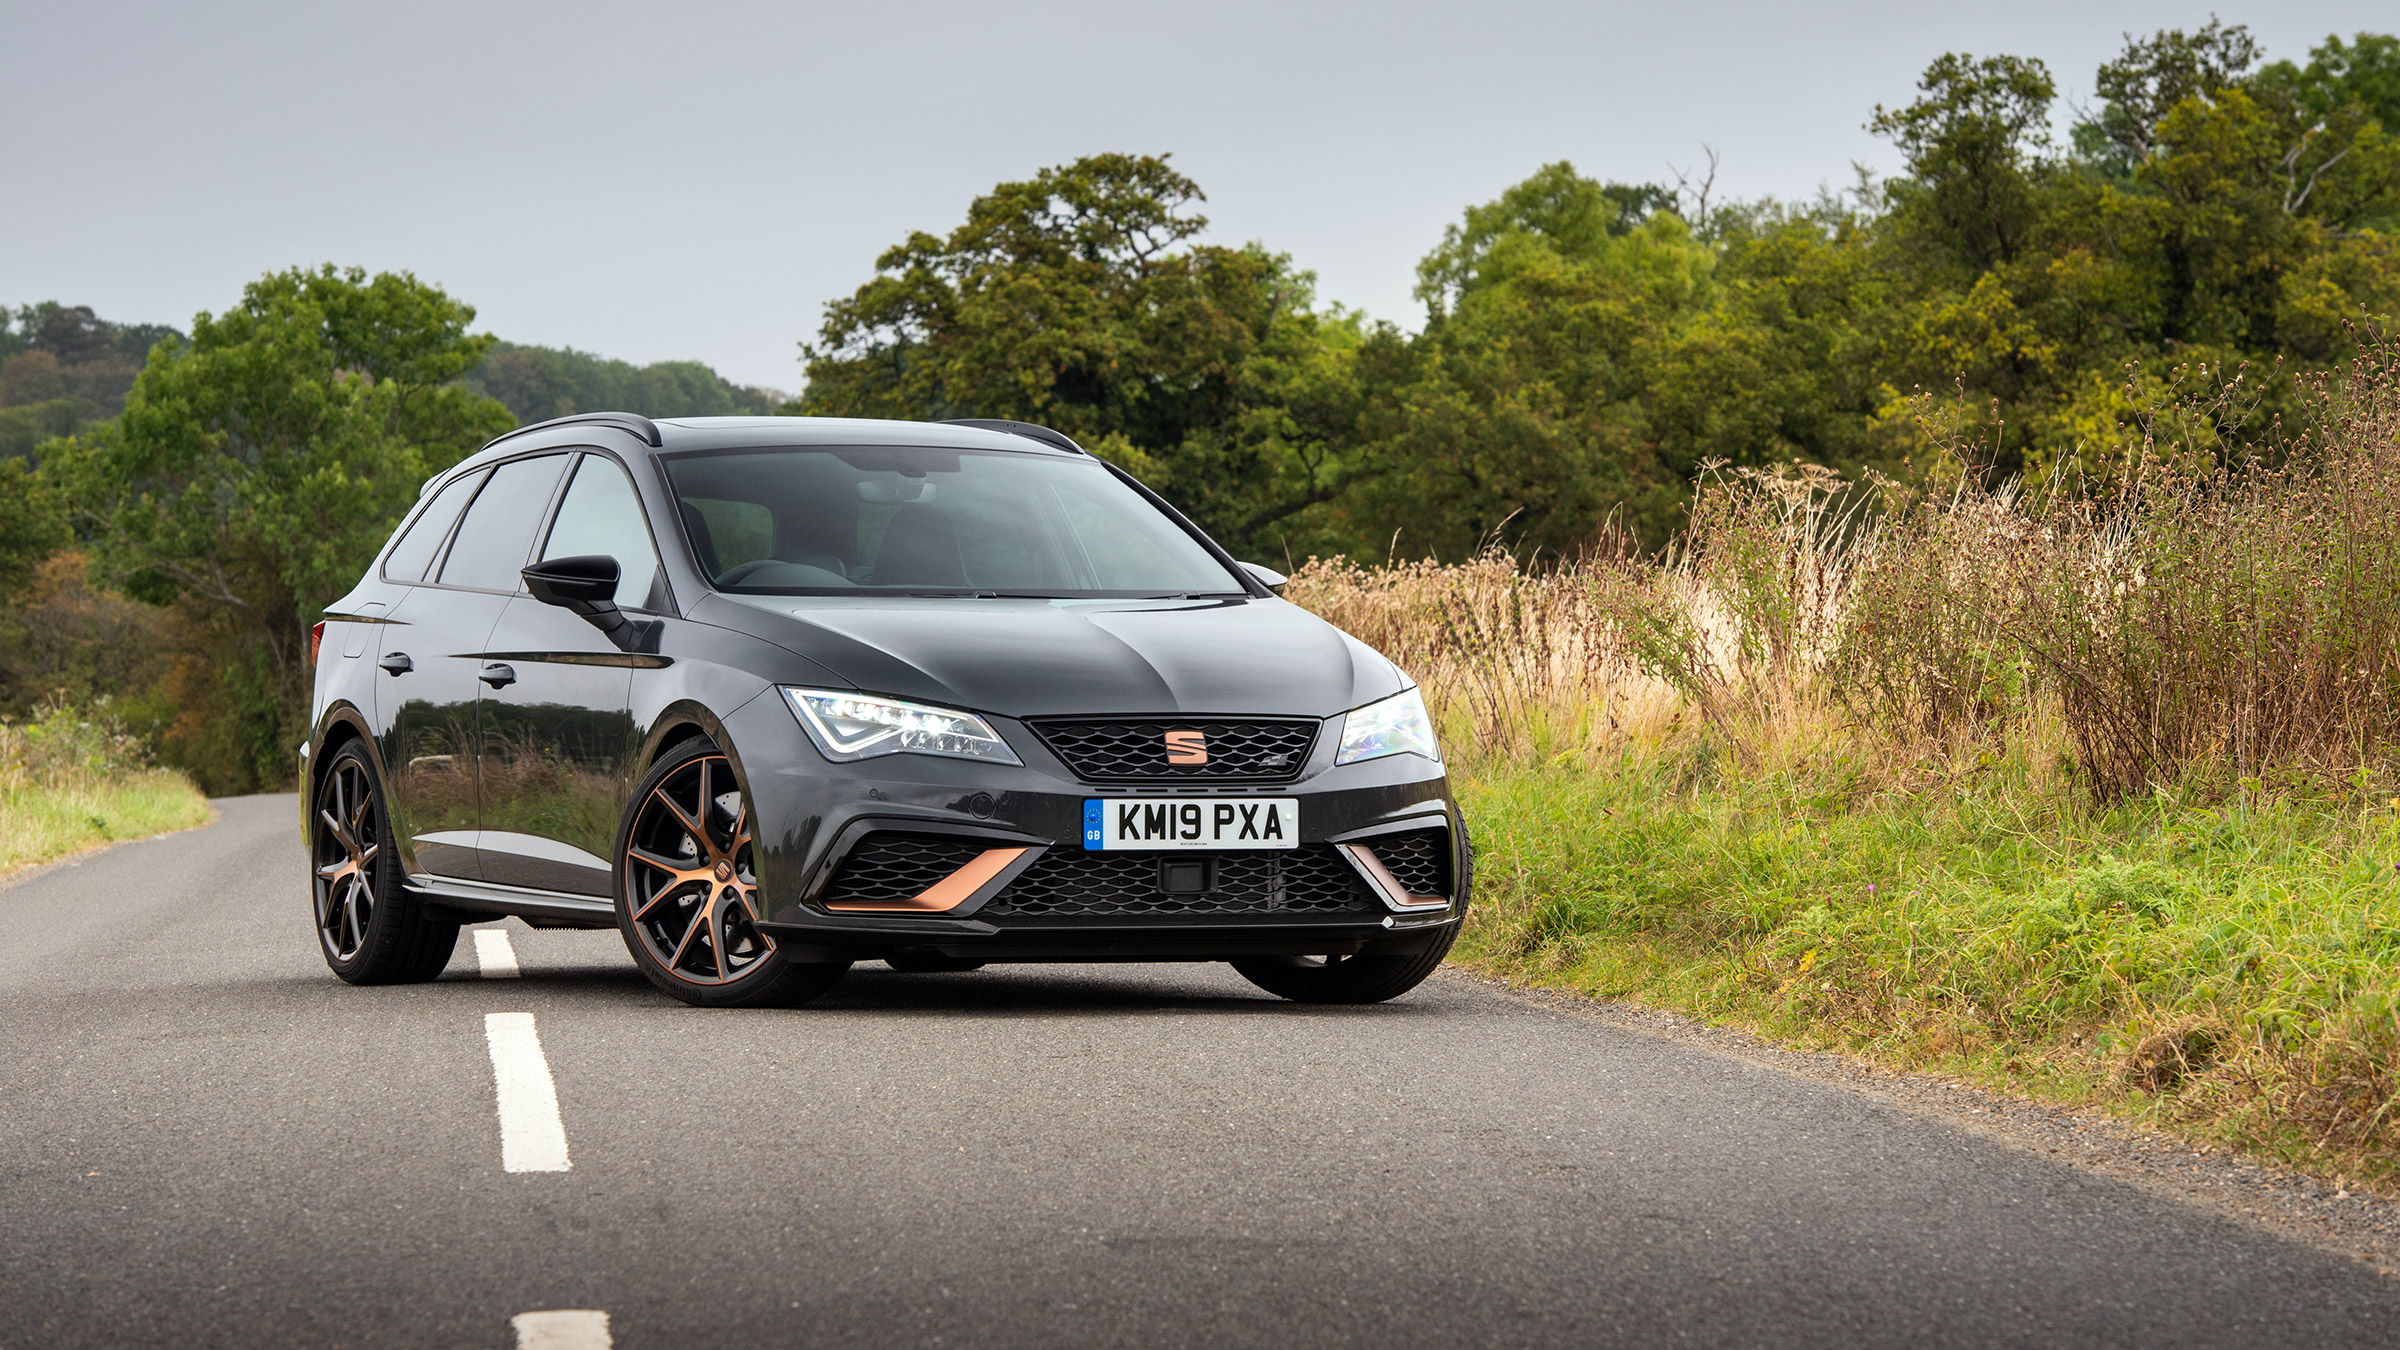 New SEAT Leon Cupra R 2018 review – is it really worth the money